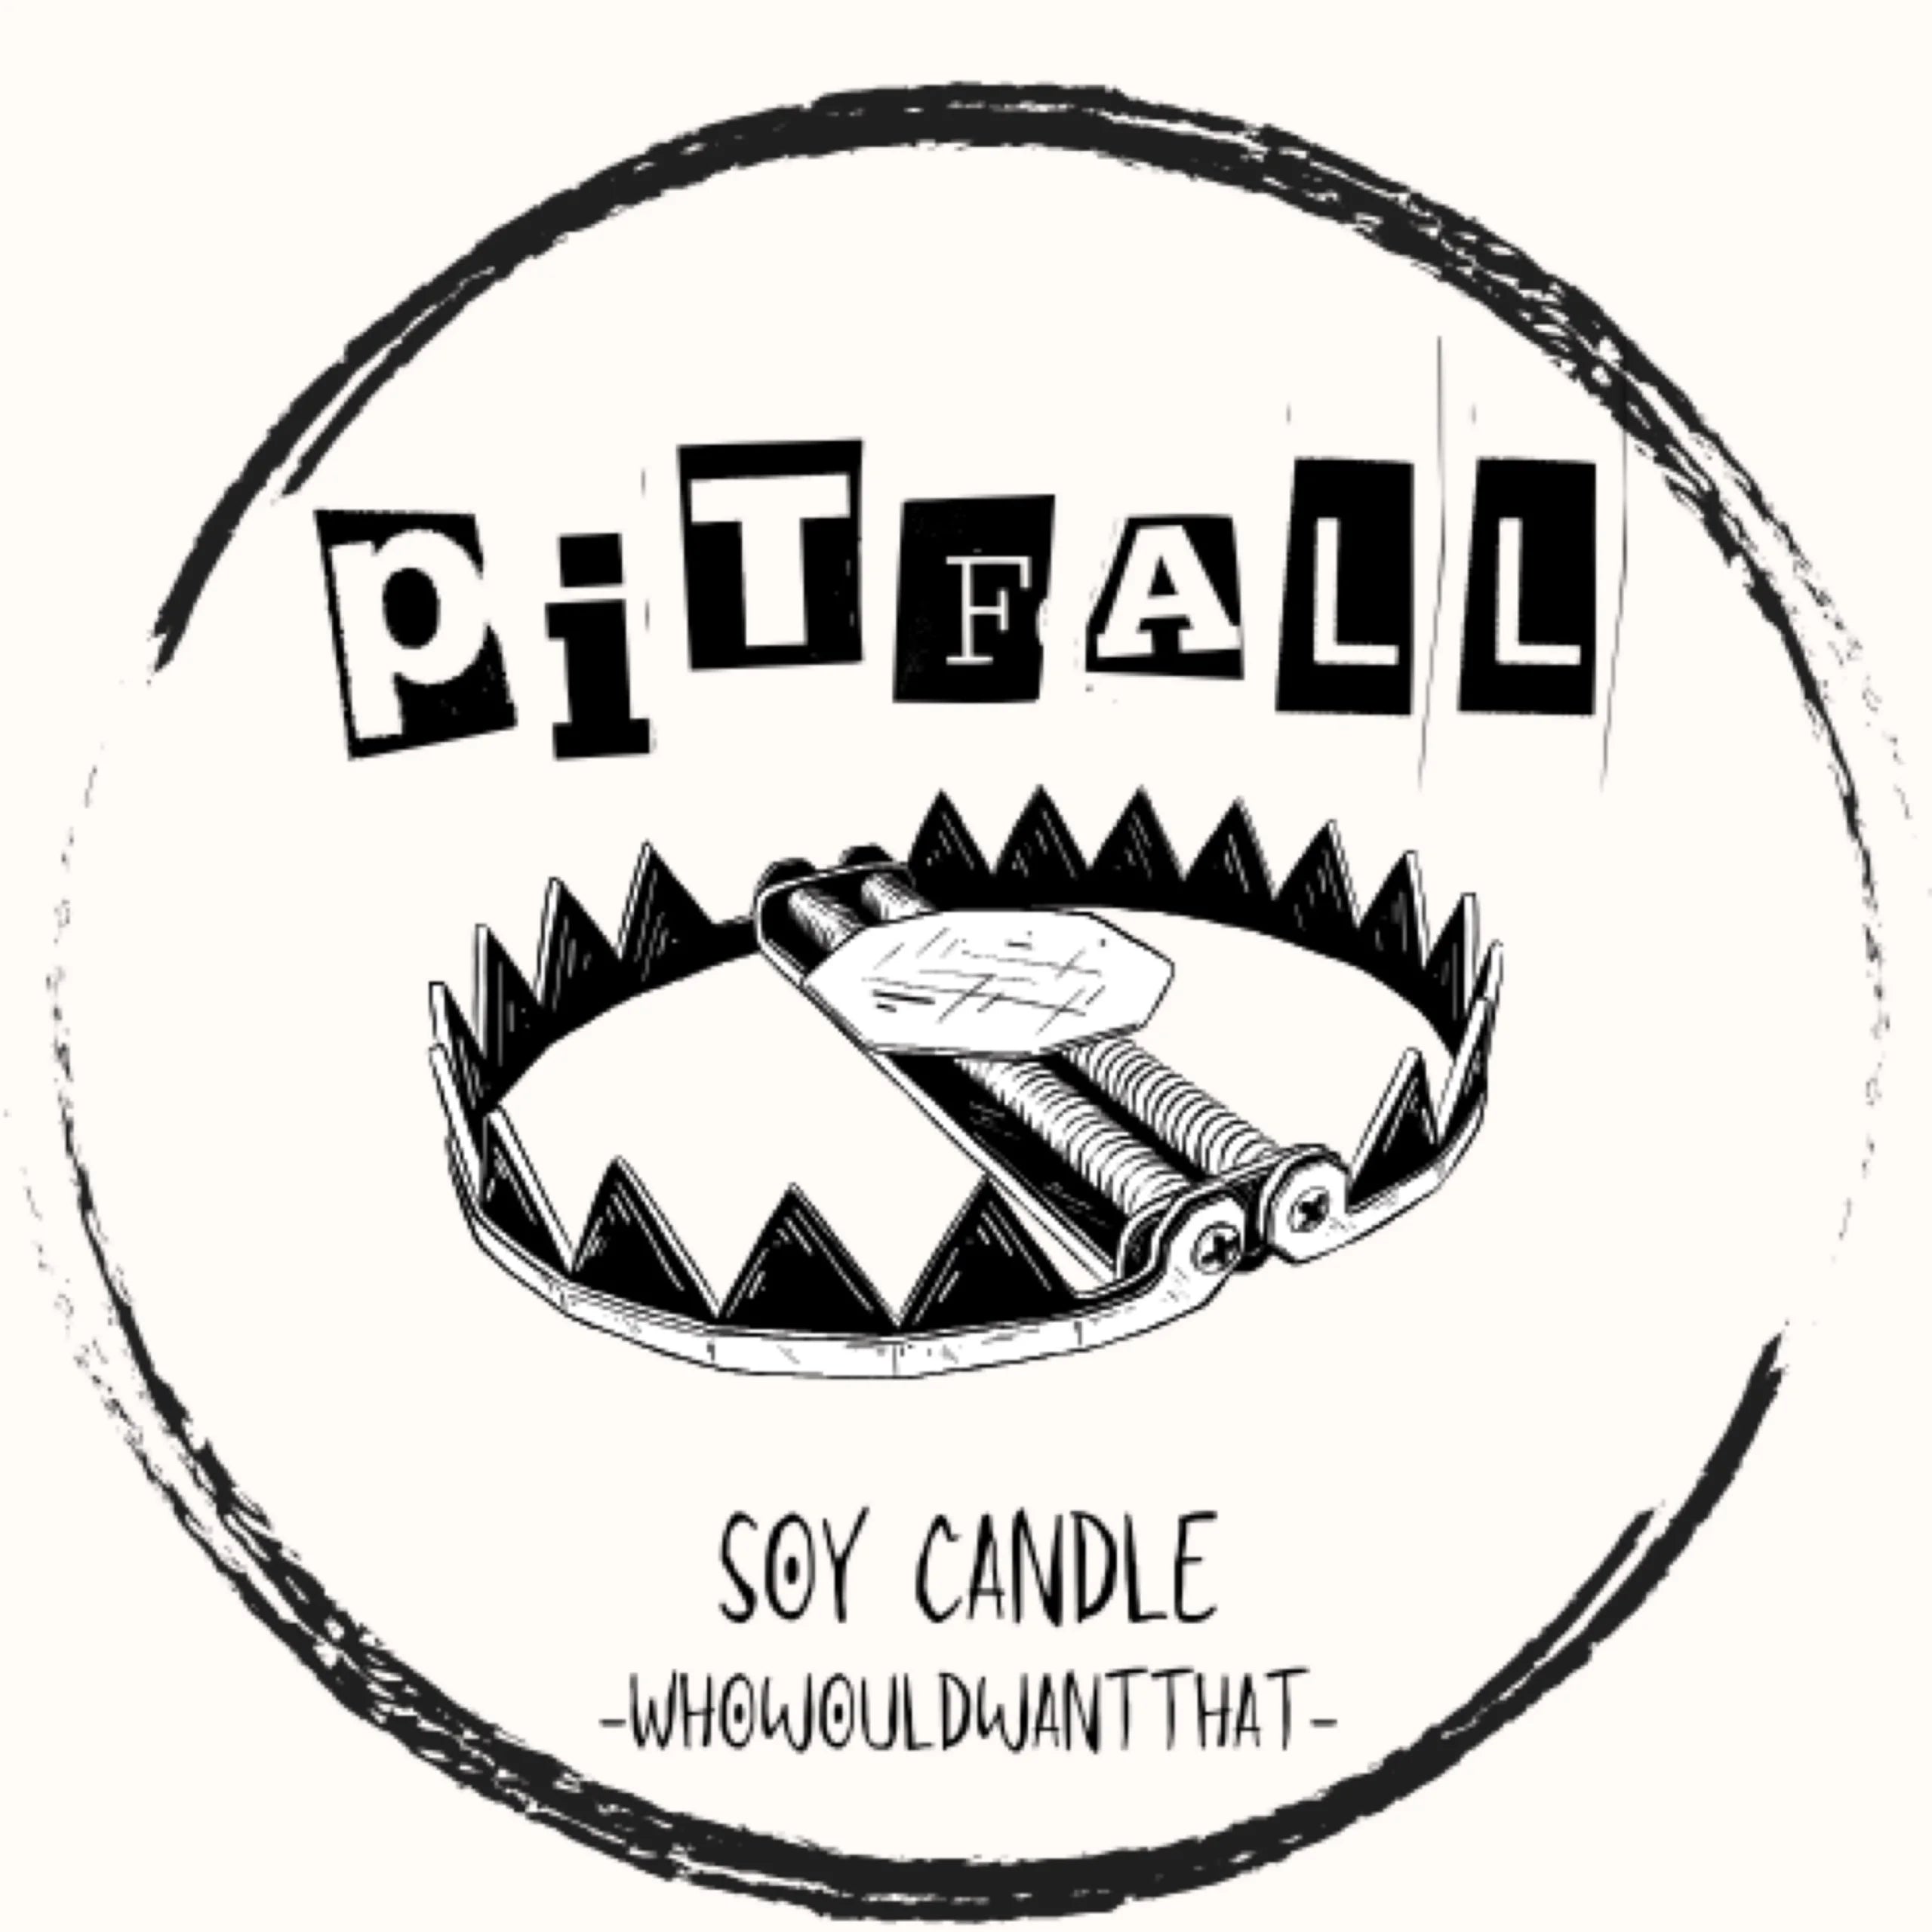 Pitfall Candle - 4 oz Scented Soy Candle - Who Would Want That